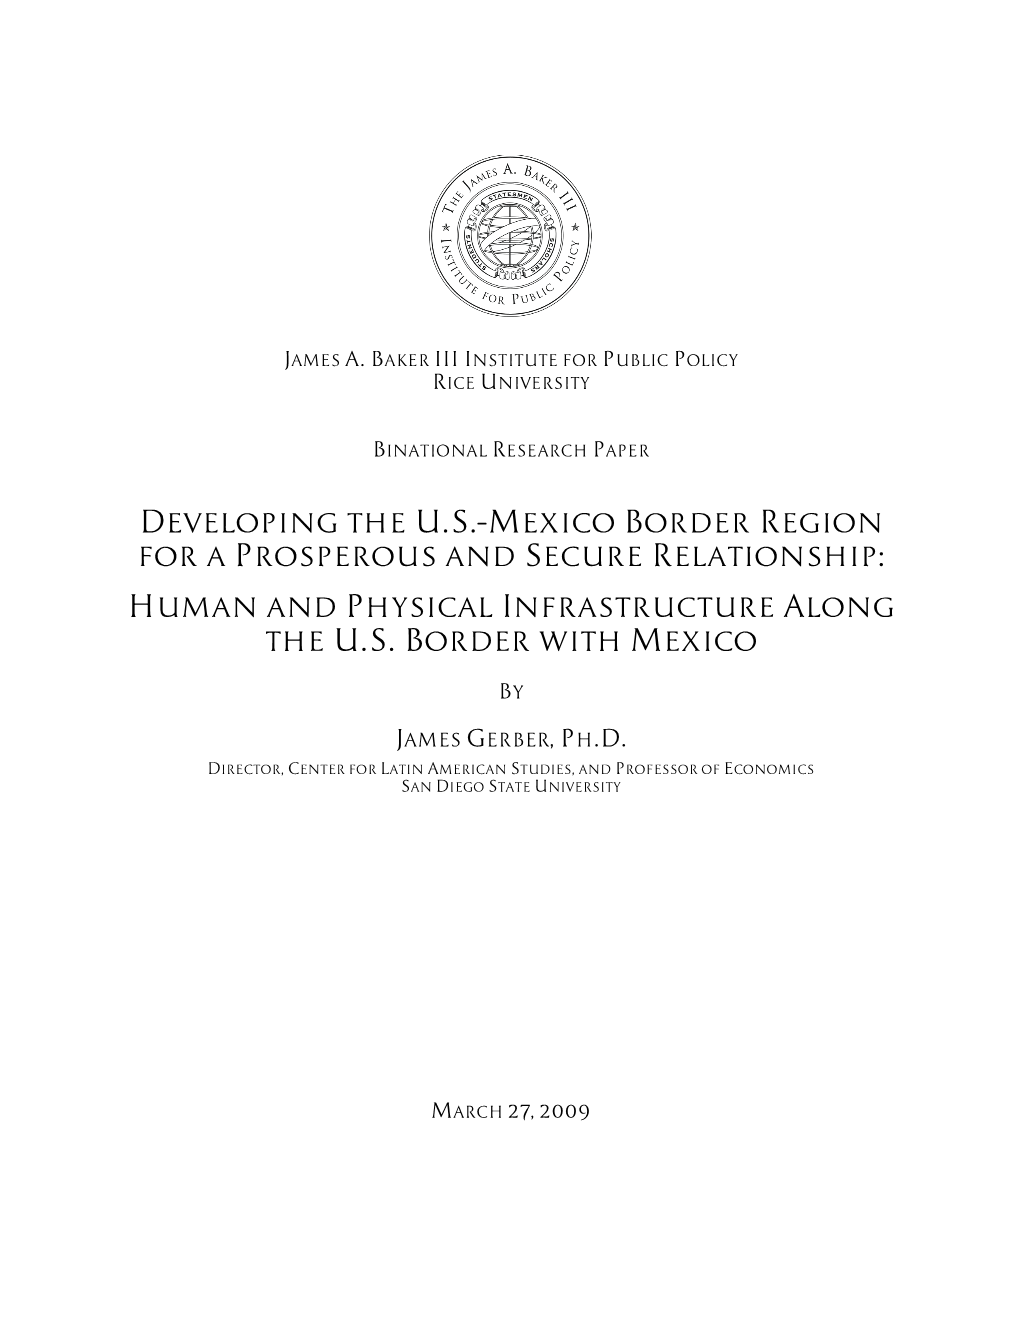 Human and Physical Infrastructure Along the U.S. Border with Mexico